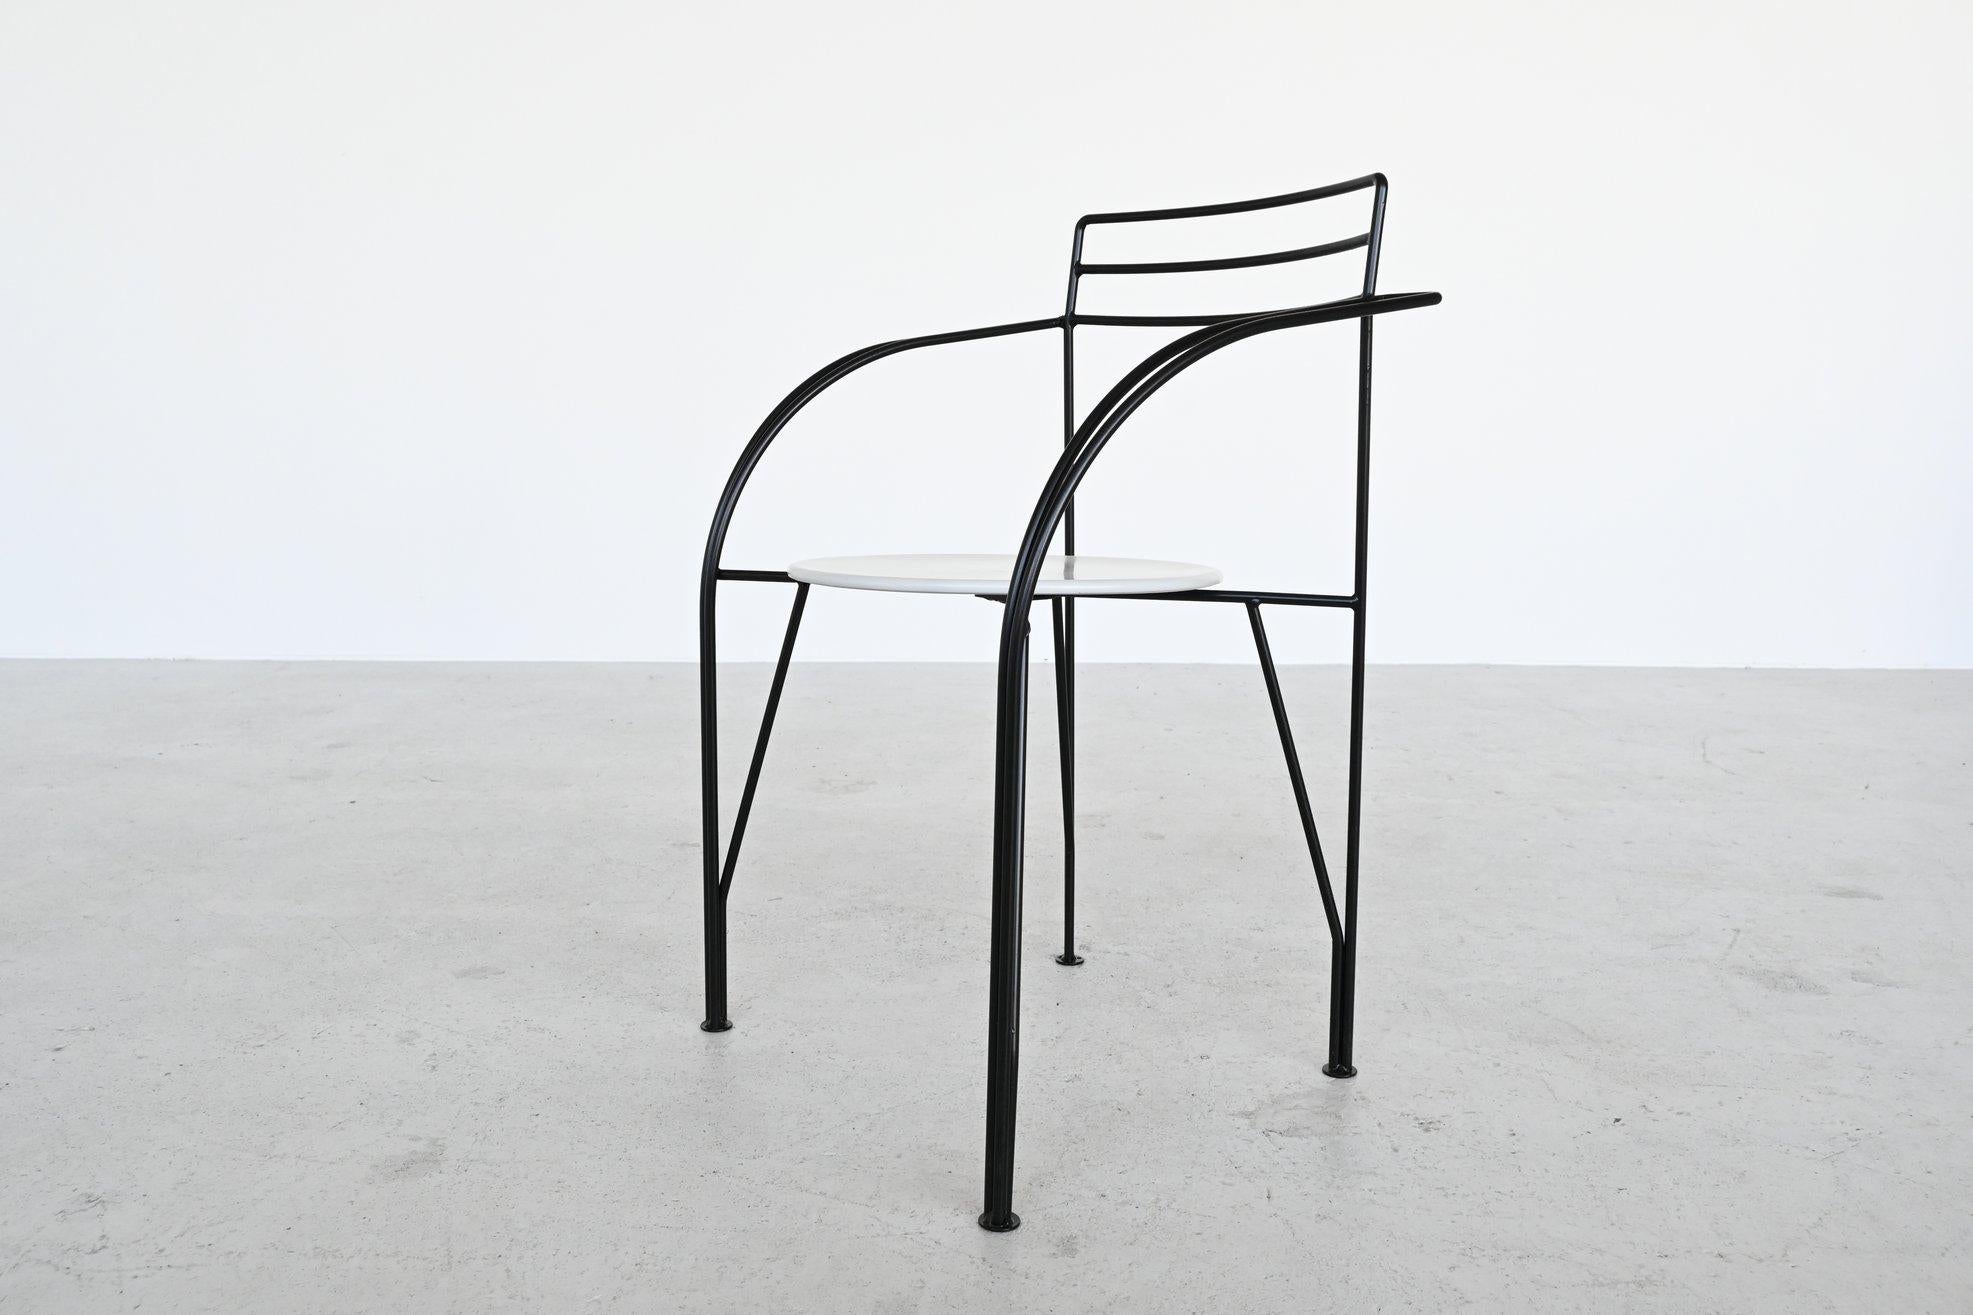 Metal Pascal Mourgue Silver Moon Dining Chairs Fermob, France, 1985